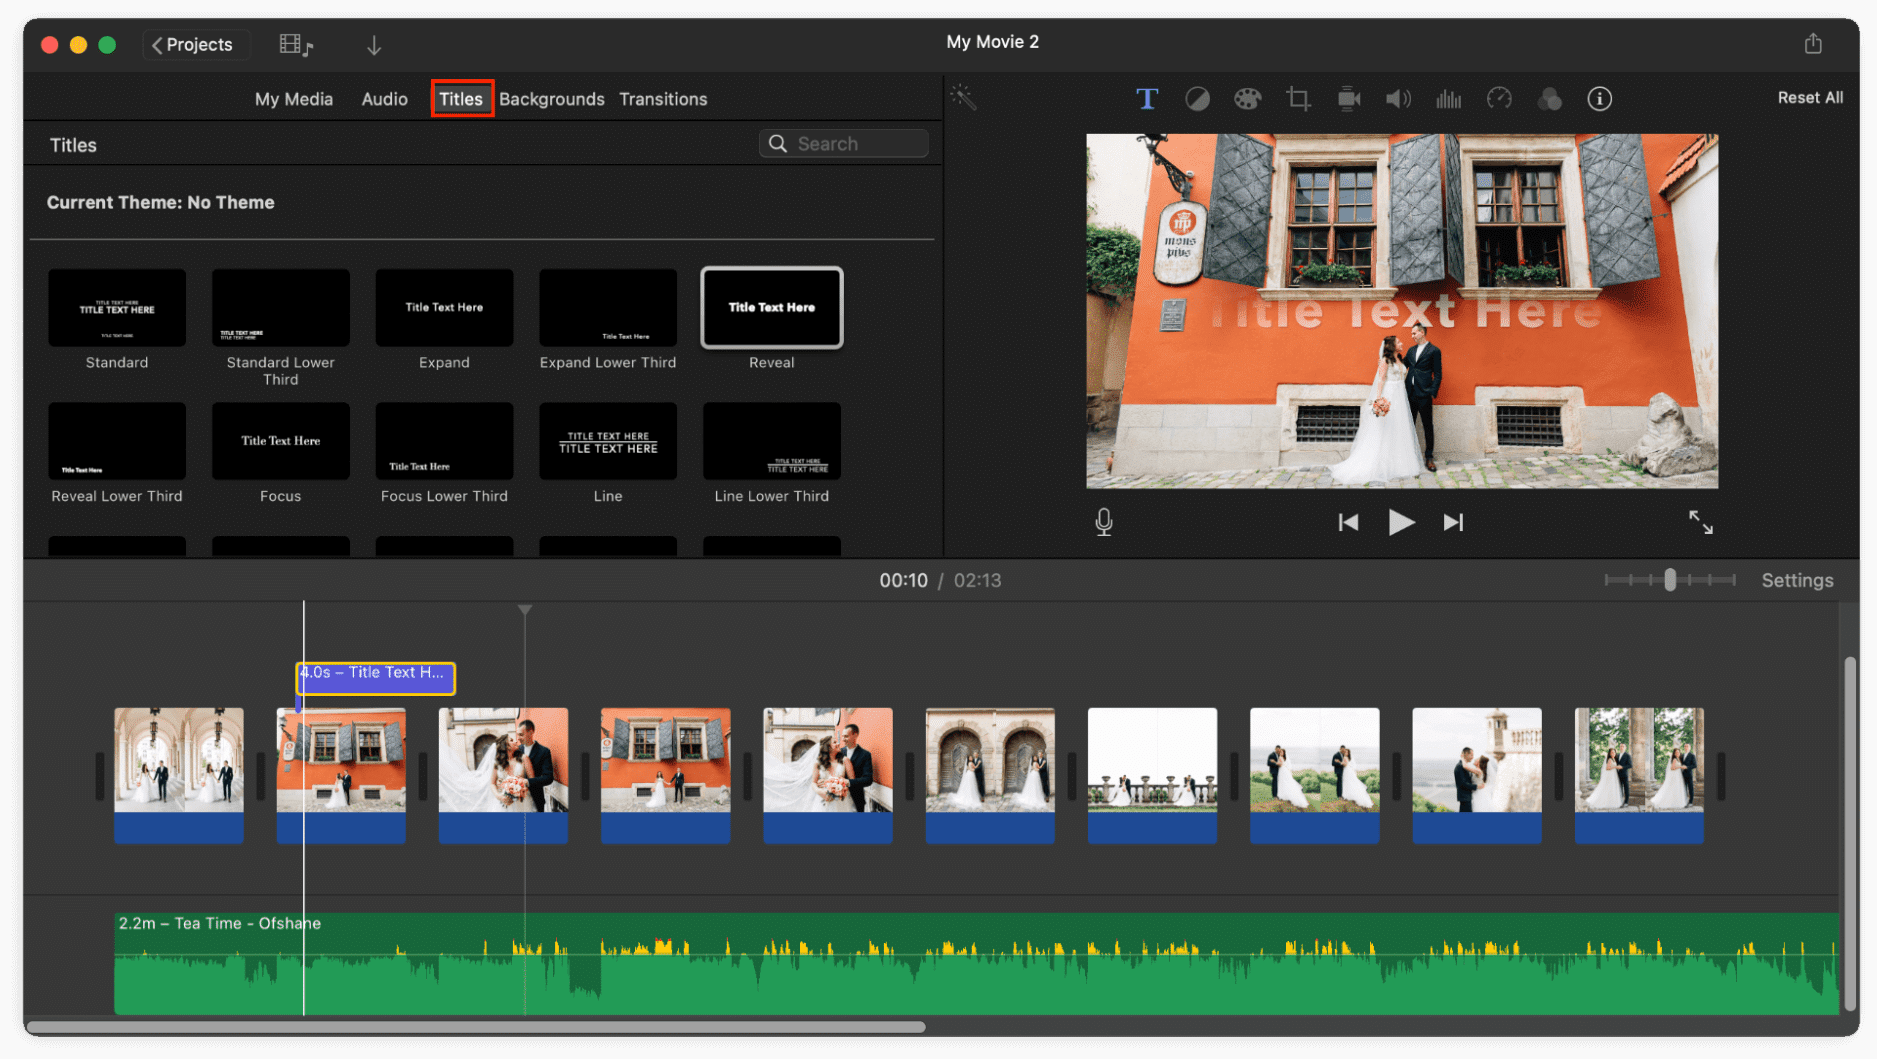 Titles section shown in iMovie